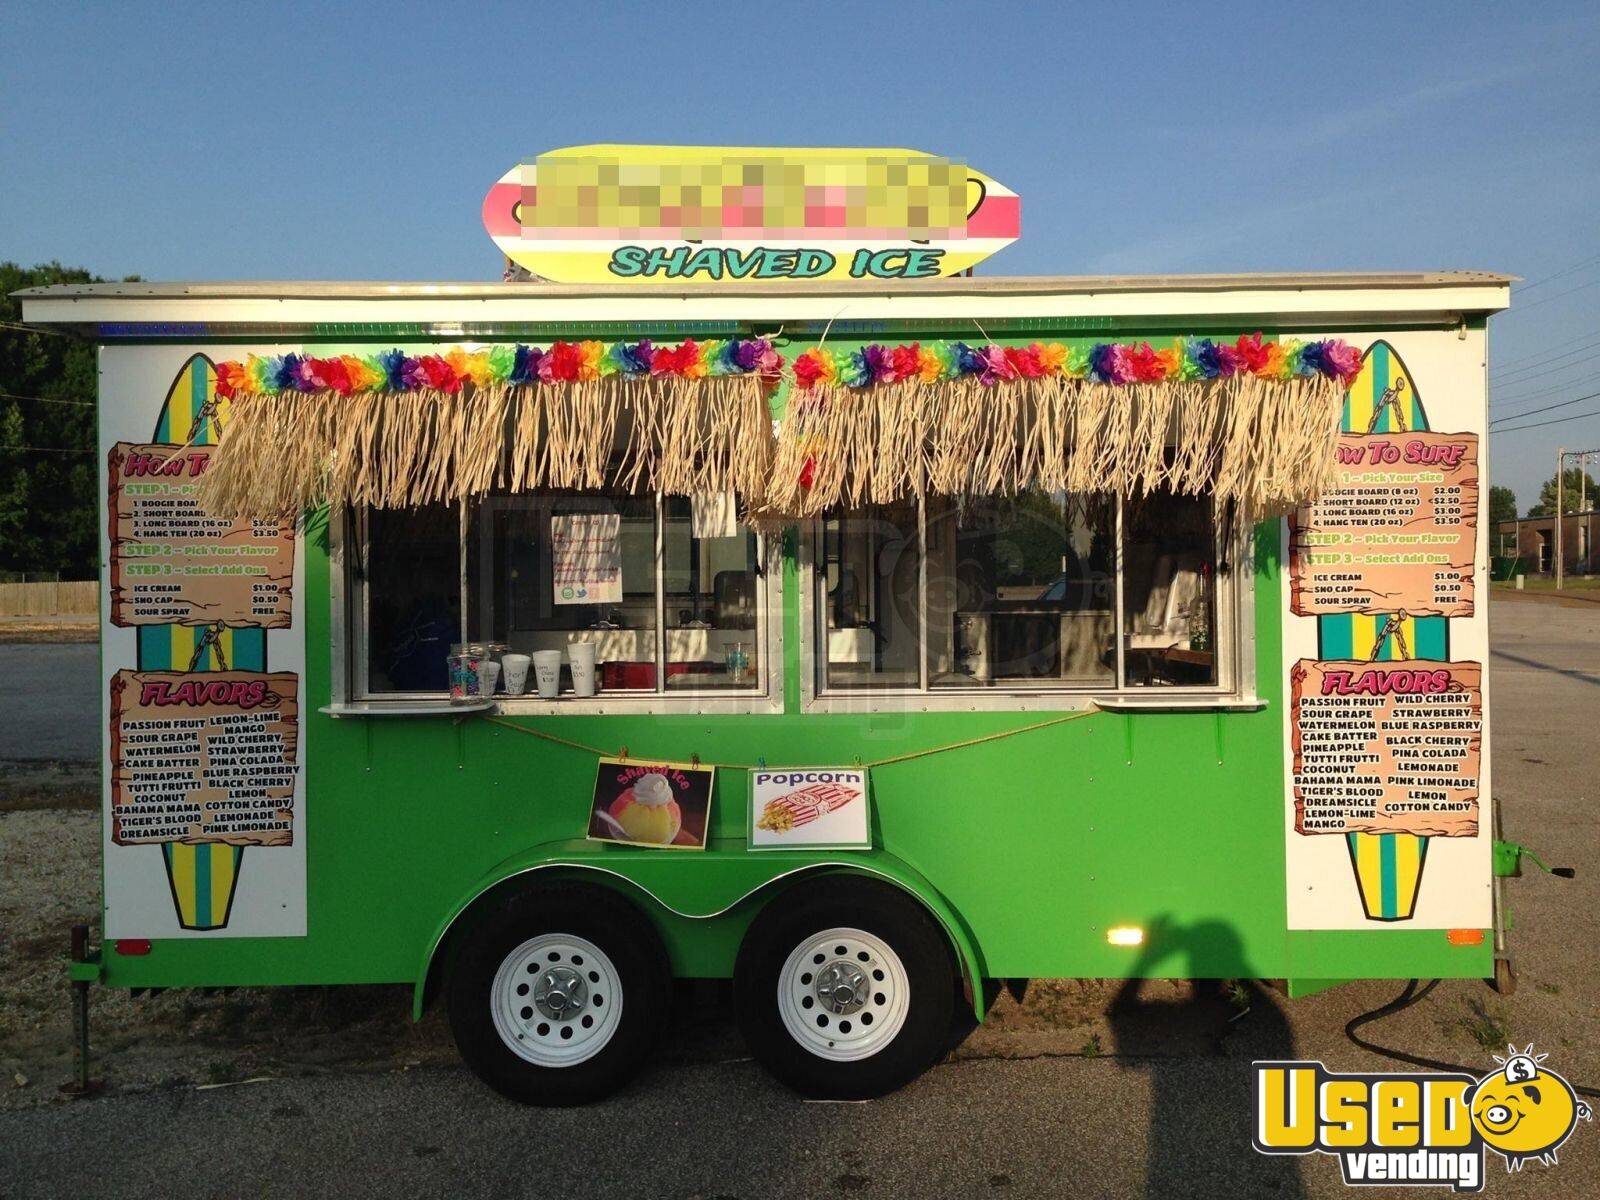 Turnkey Sno Pro Shaved Ice Trailer Concession Business For Sale Images, Photos, Reviews